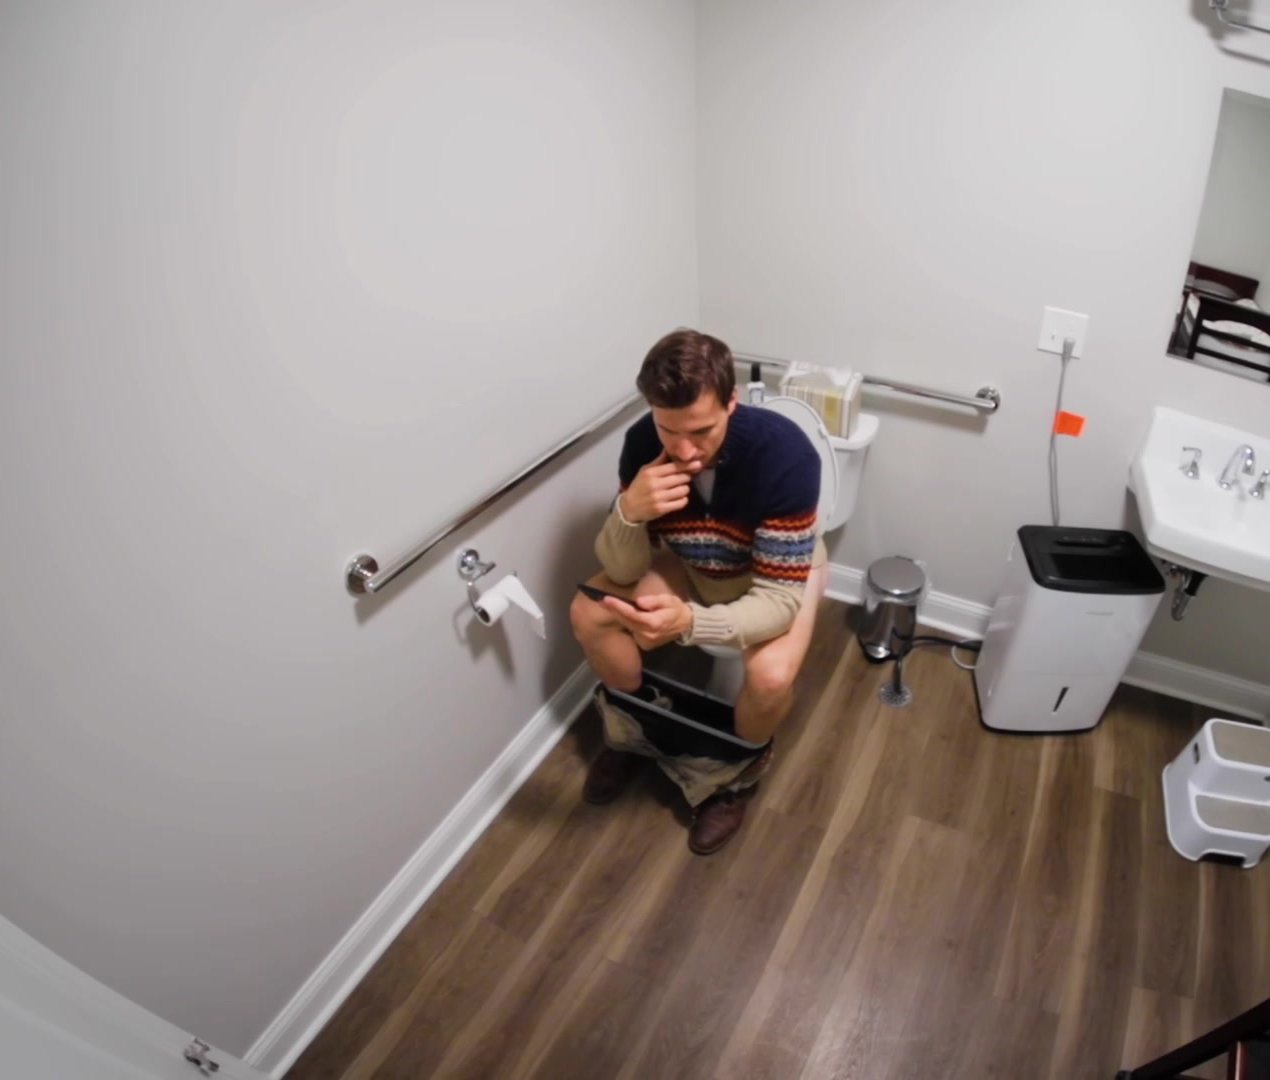 Cute guy sitting on the toilet